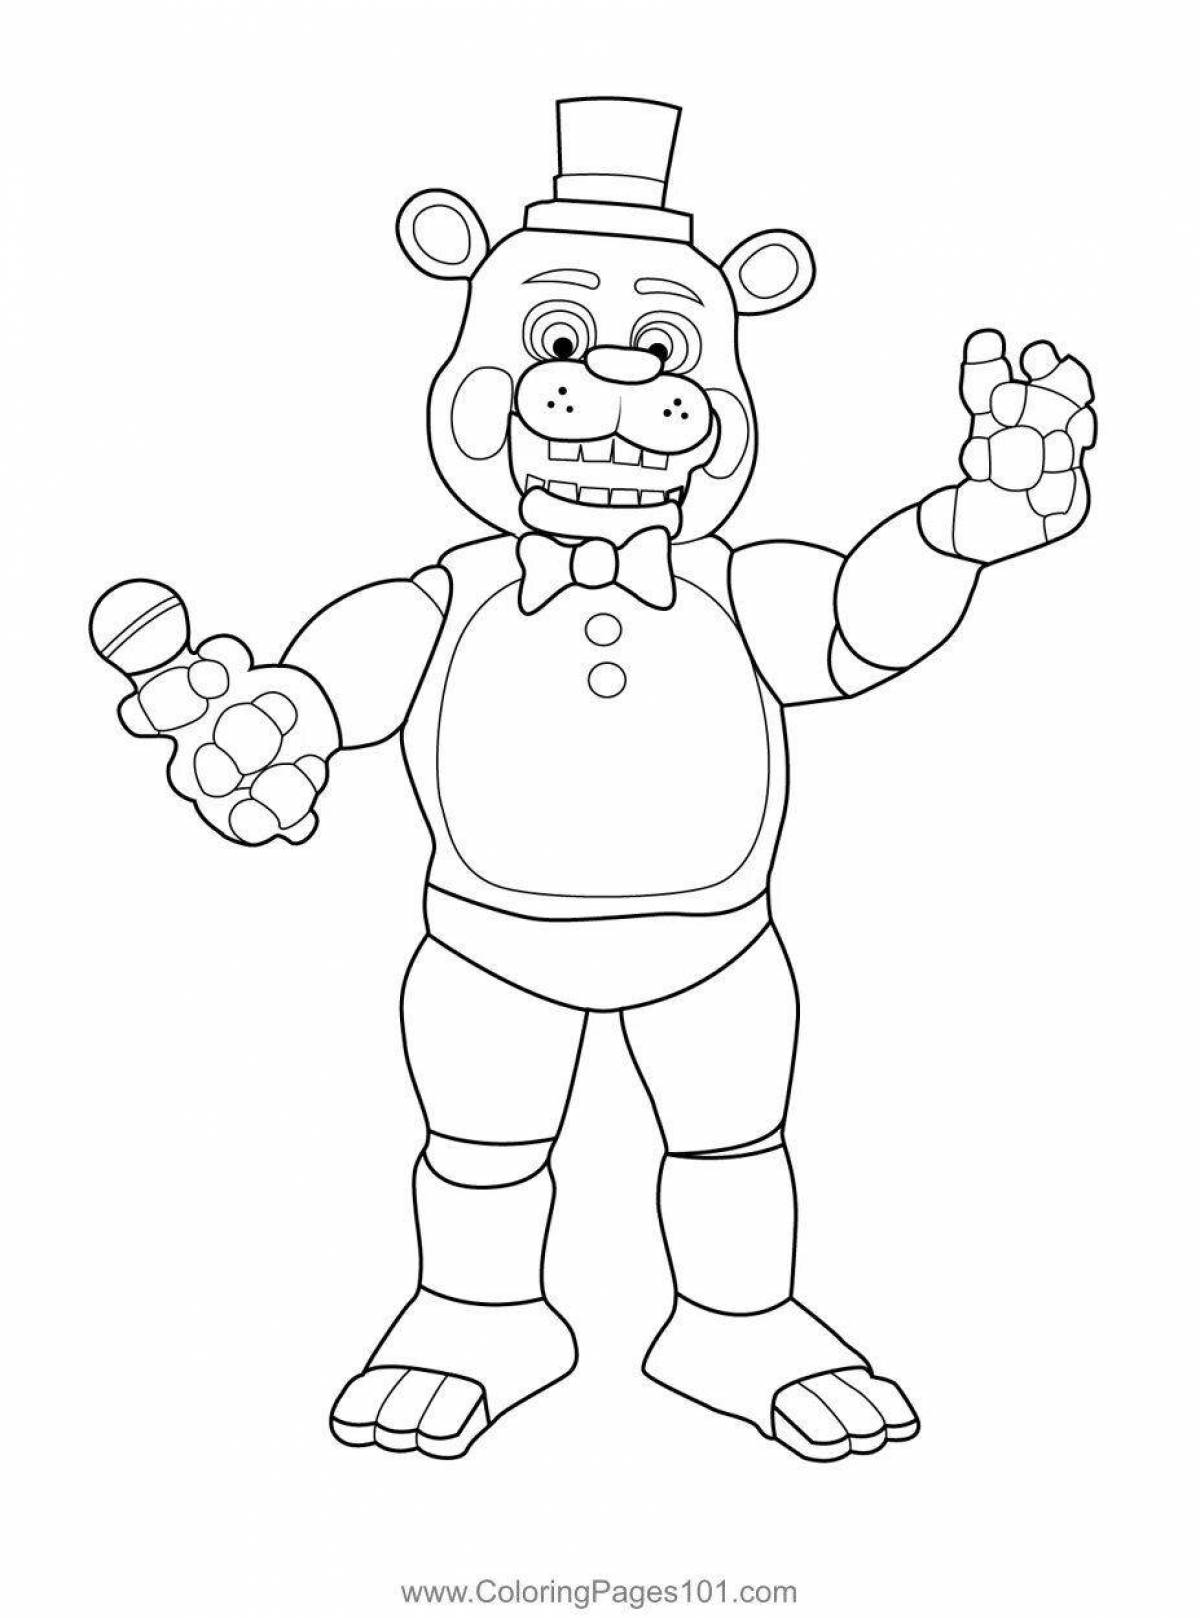 Great freddy bear coloring book for kids